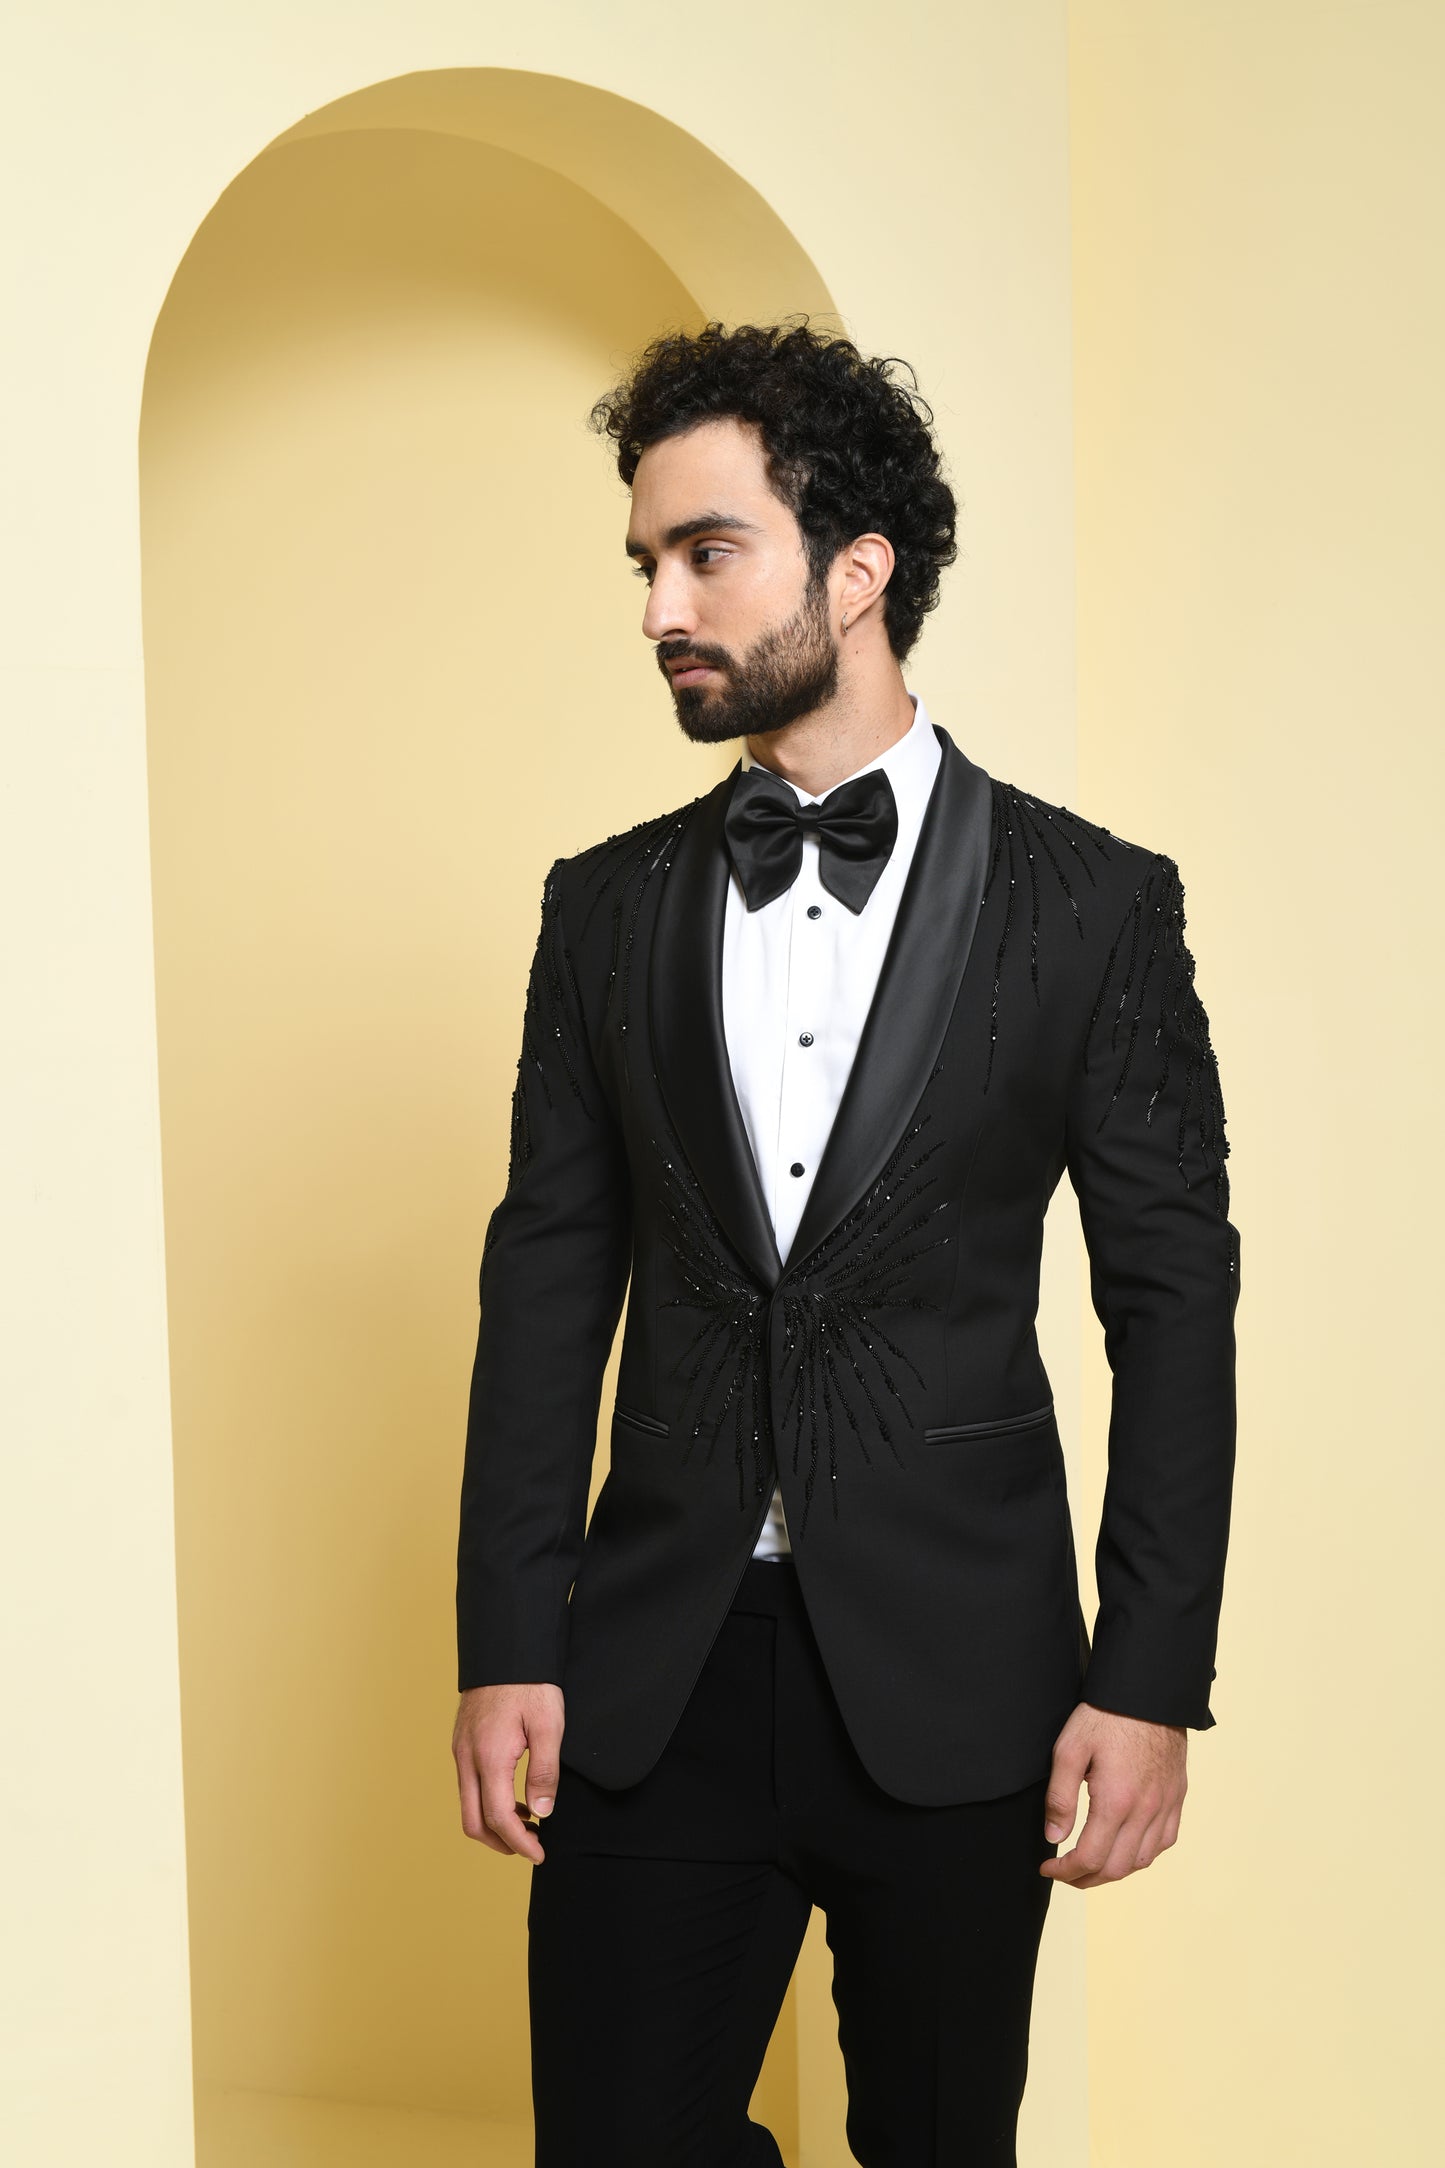 Modern Fit Tuxedo with Shawl Collar and fine details